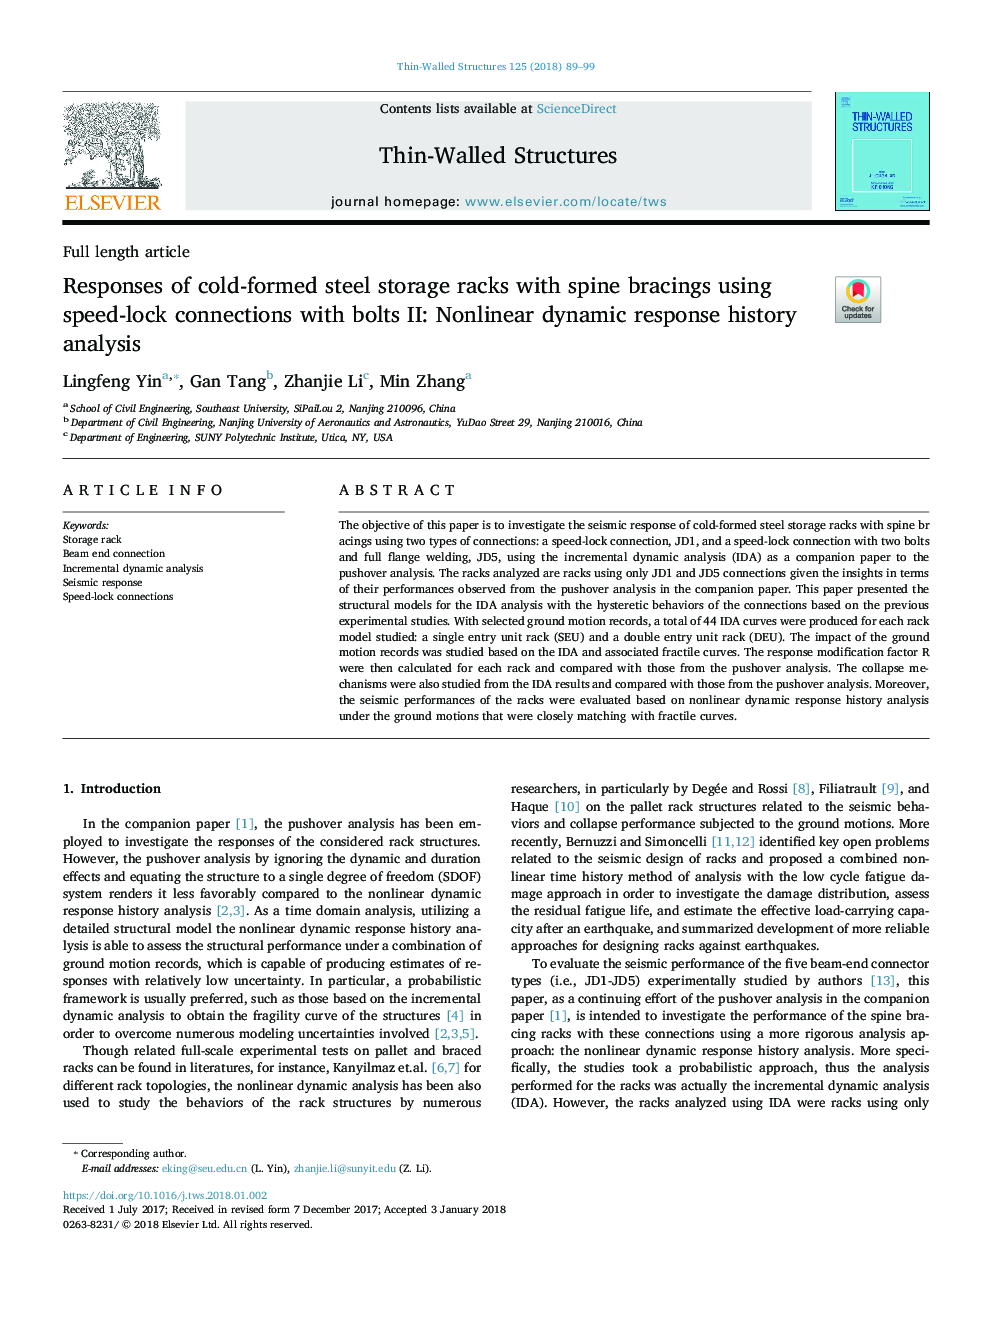 Responses of cold-formed steel storage racks with spine bracings using speed-lock connections with bolts II: Nonlinear dynamic response history analysis